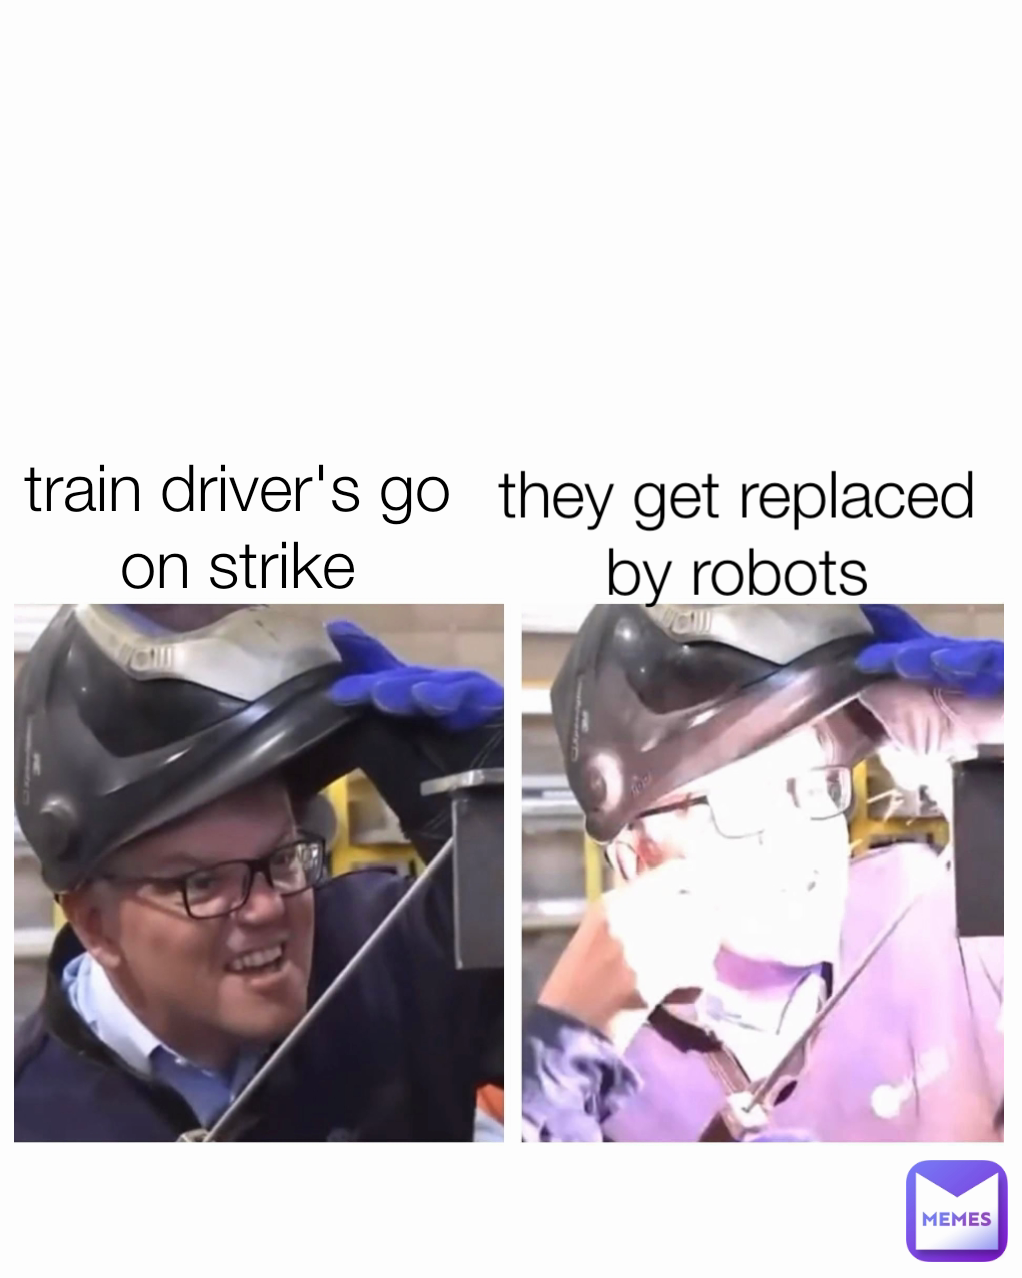 they get replaced by robots train driver's go on strike | @ahnafhaque ...